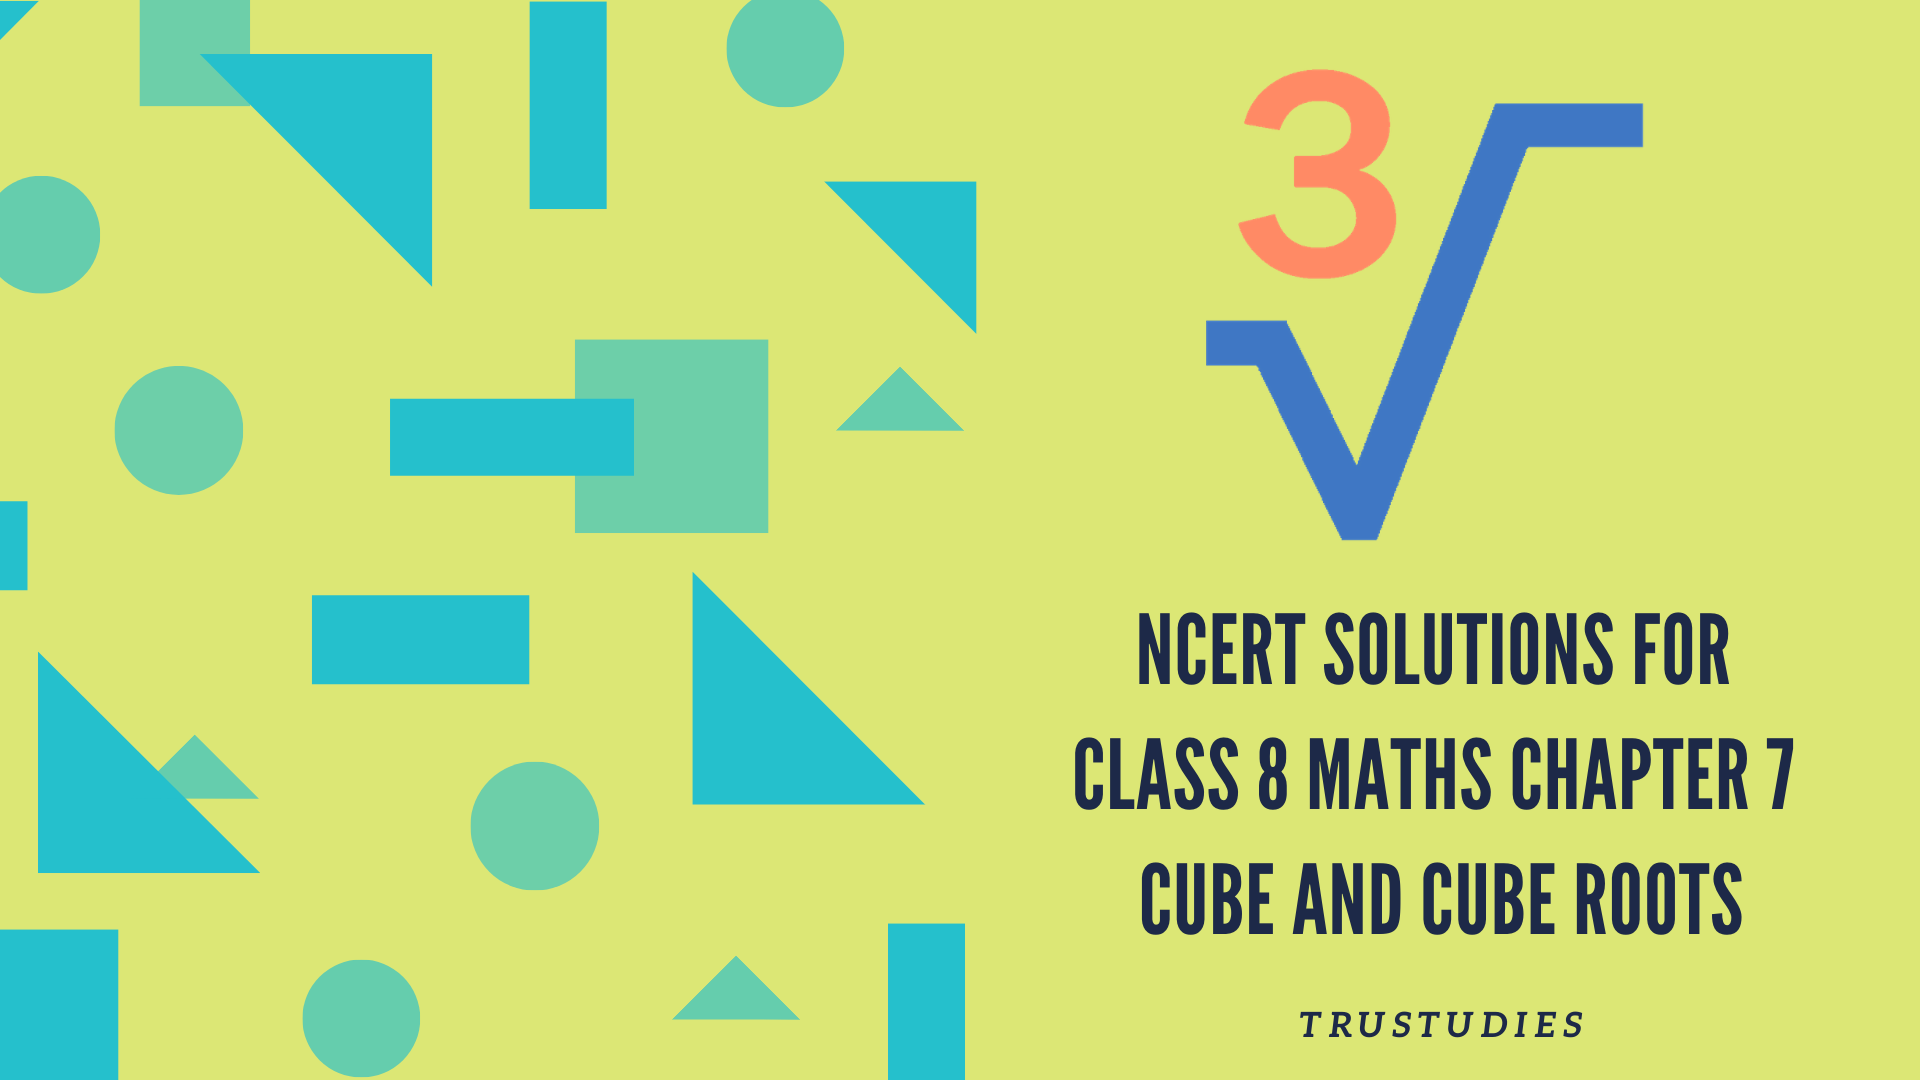 NCERT solutions for class 8 maths chapter 7 cube and cube roots banner image